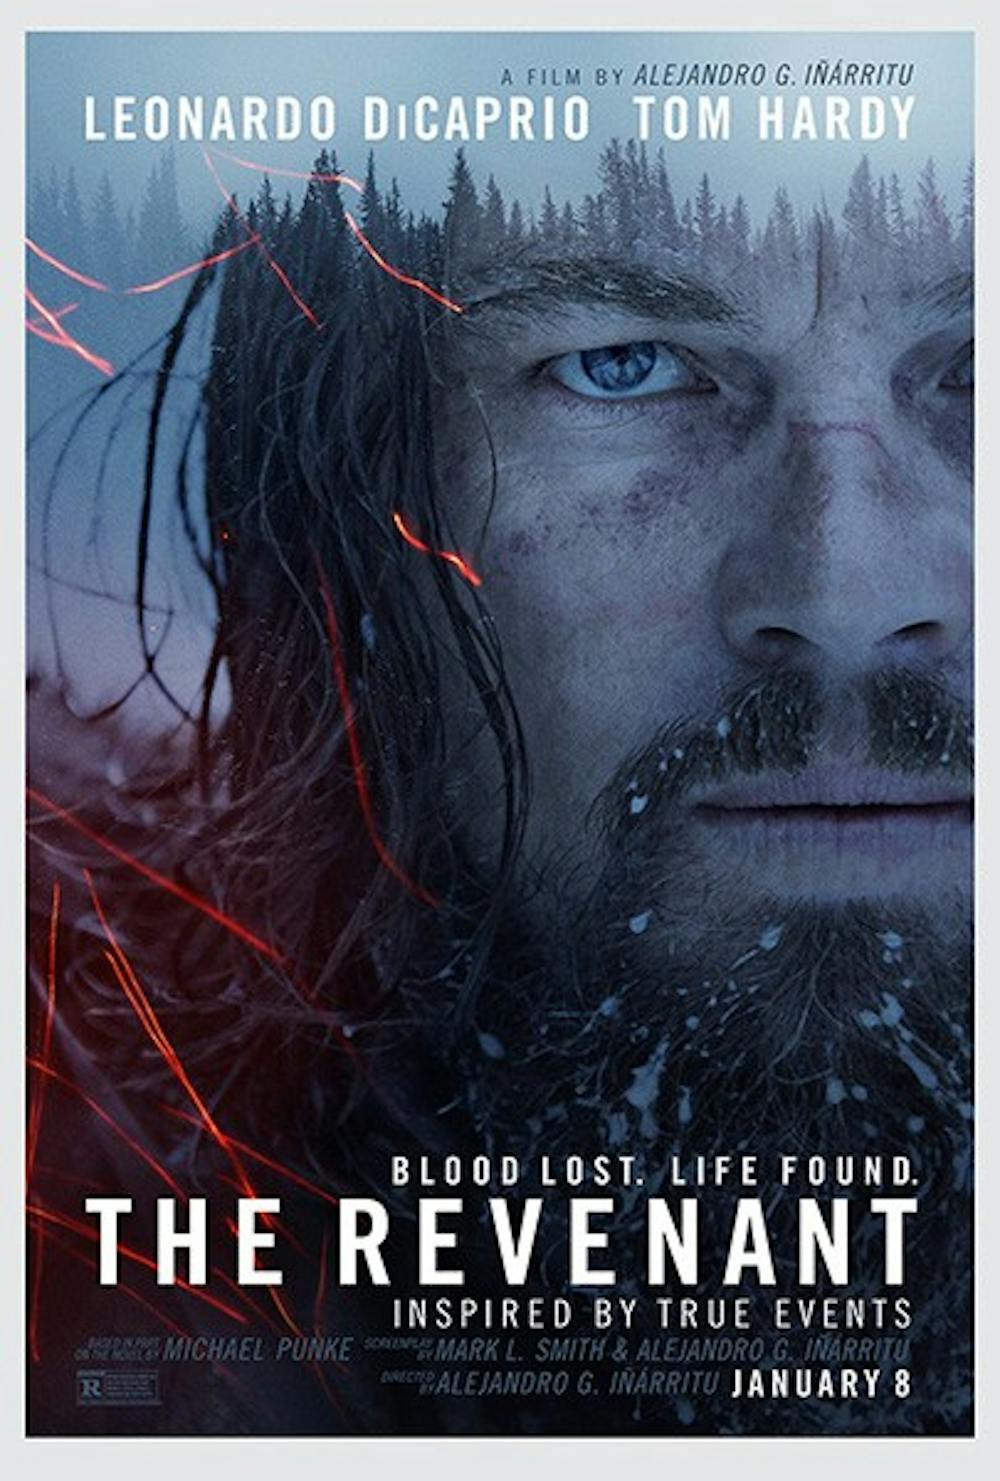 <p>Despite predictions, Leonardo DiCaprio's performance in "The Revenant" is less than stellar, potentially costing him an Oscar.</p>